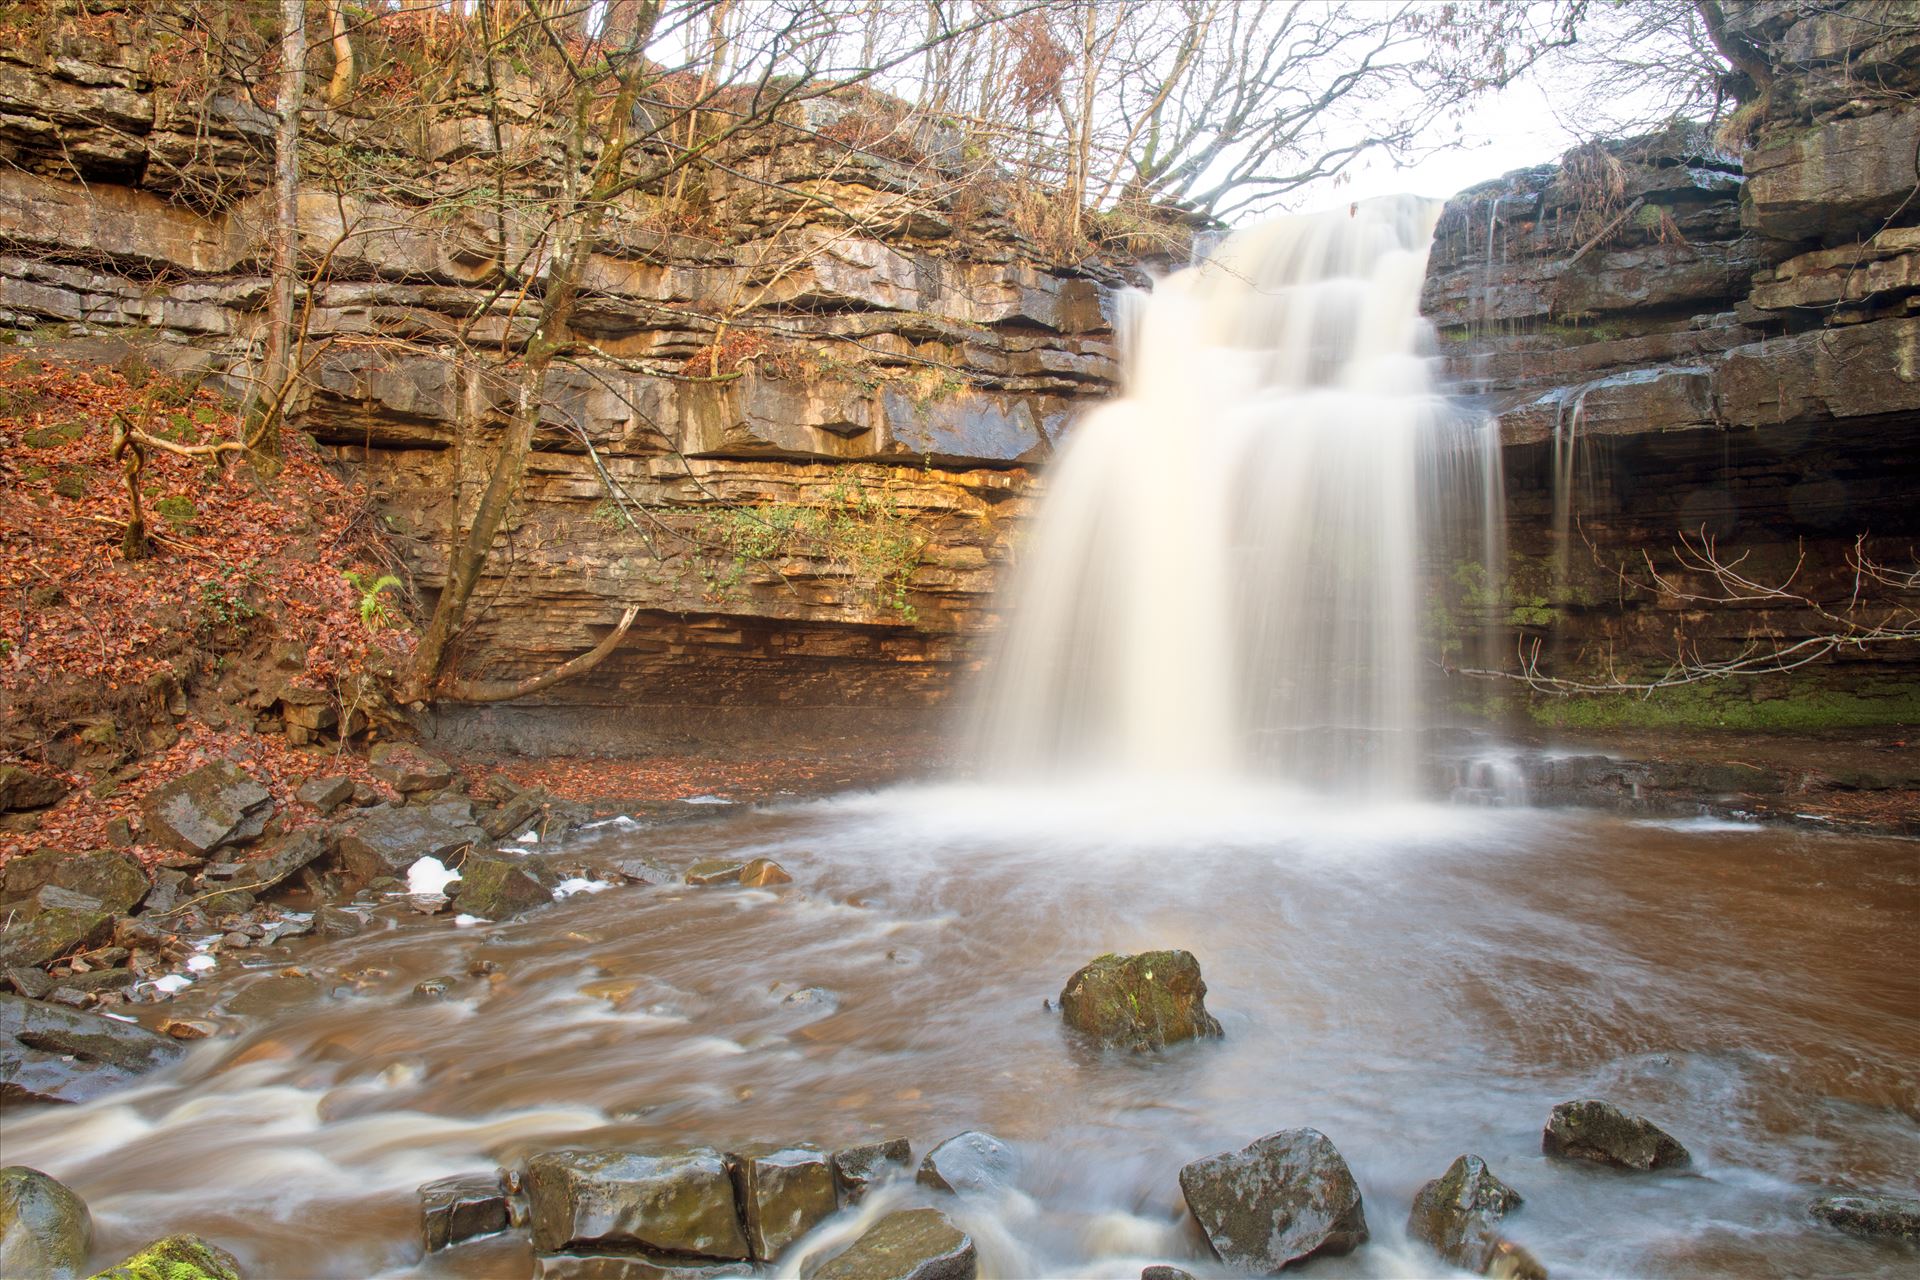 Summerhill Force - Summerhill Force is a picturesque waterfall in a wooded glade near Bowlees in Upper Teesdale. by philreay